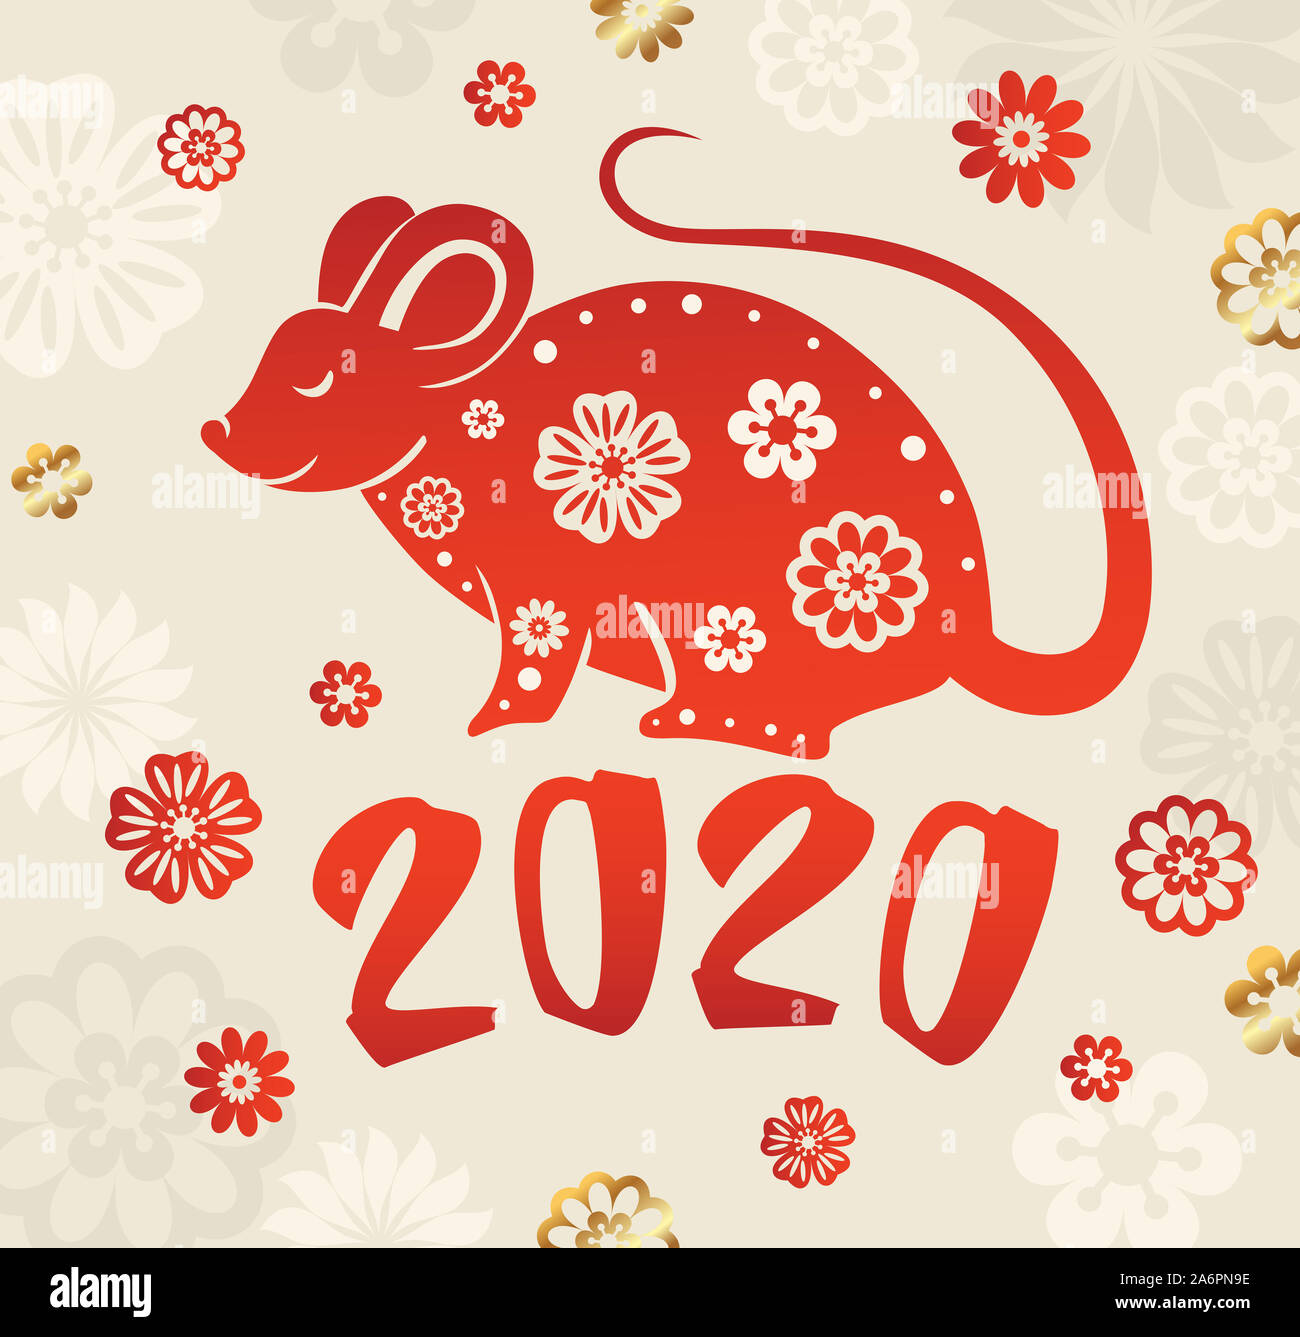 Cute rat symbol of Chinese zodiac for 2020 new year. Red silhouette of rat and flowers. Stock Photo